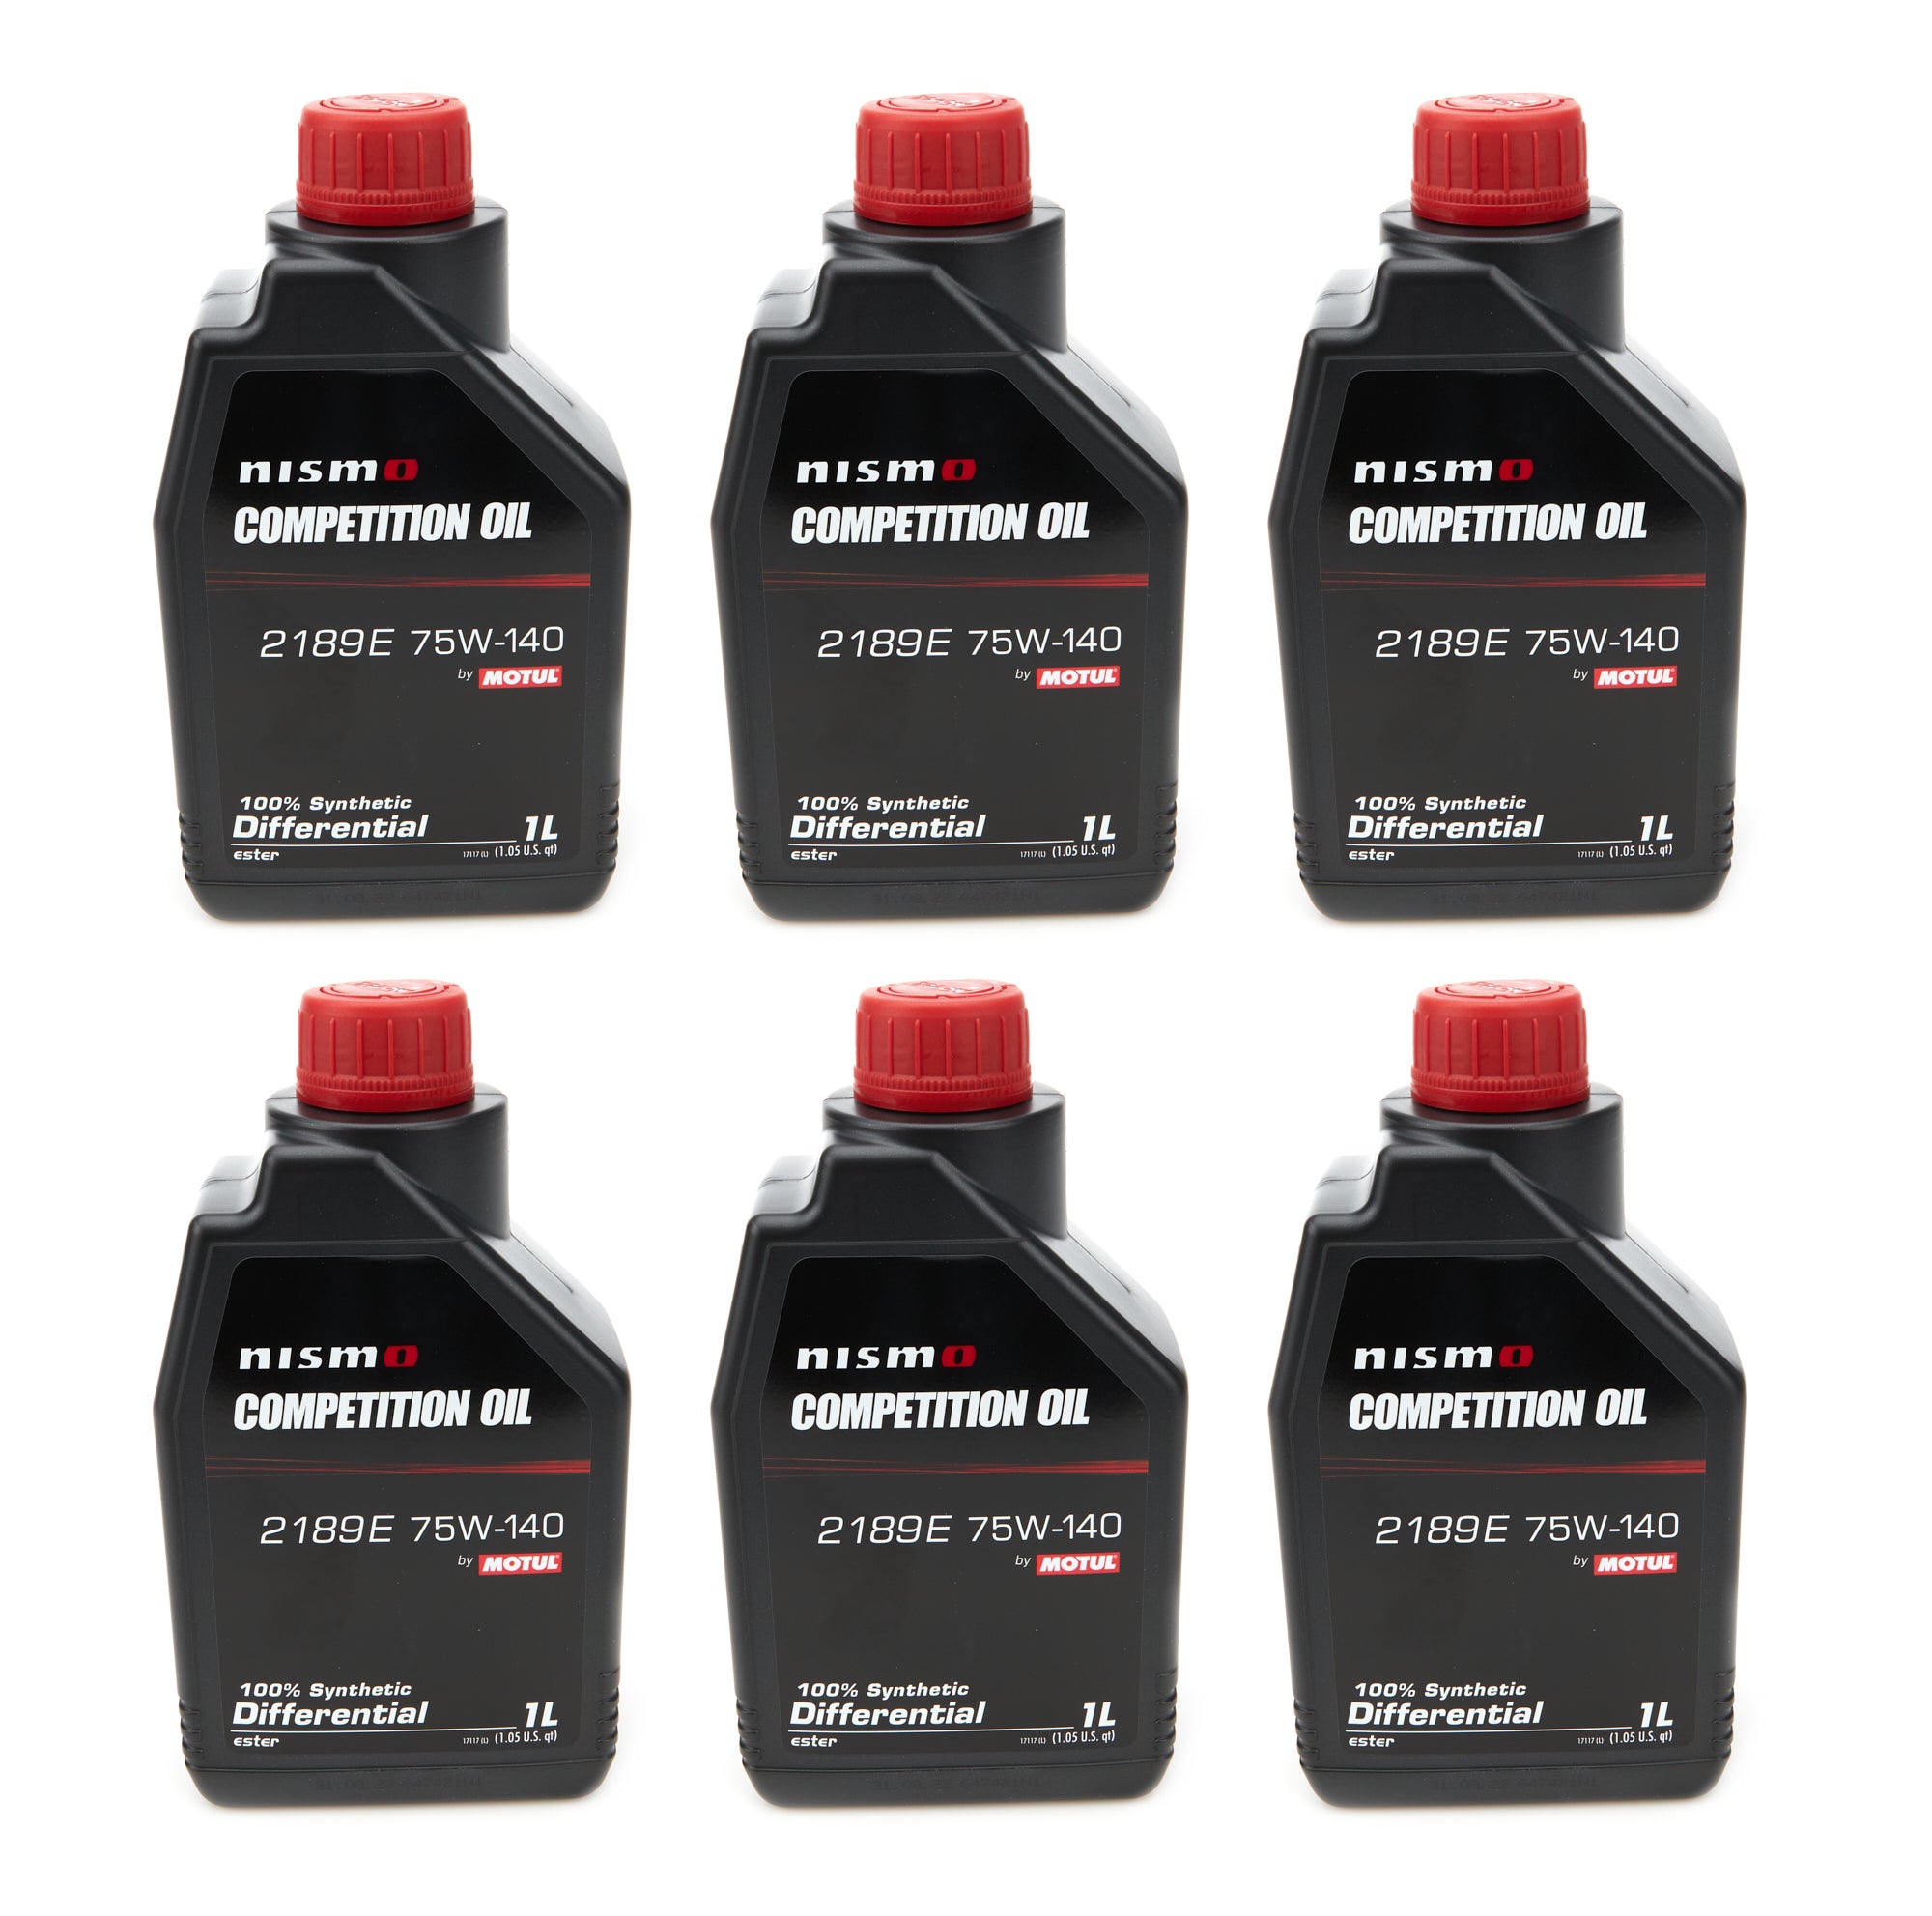 Motul Nismo Competition Oil 75w140 Case 6 x 1 Liter Oils, Fluids and Additives Gear Oil main image